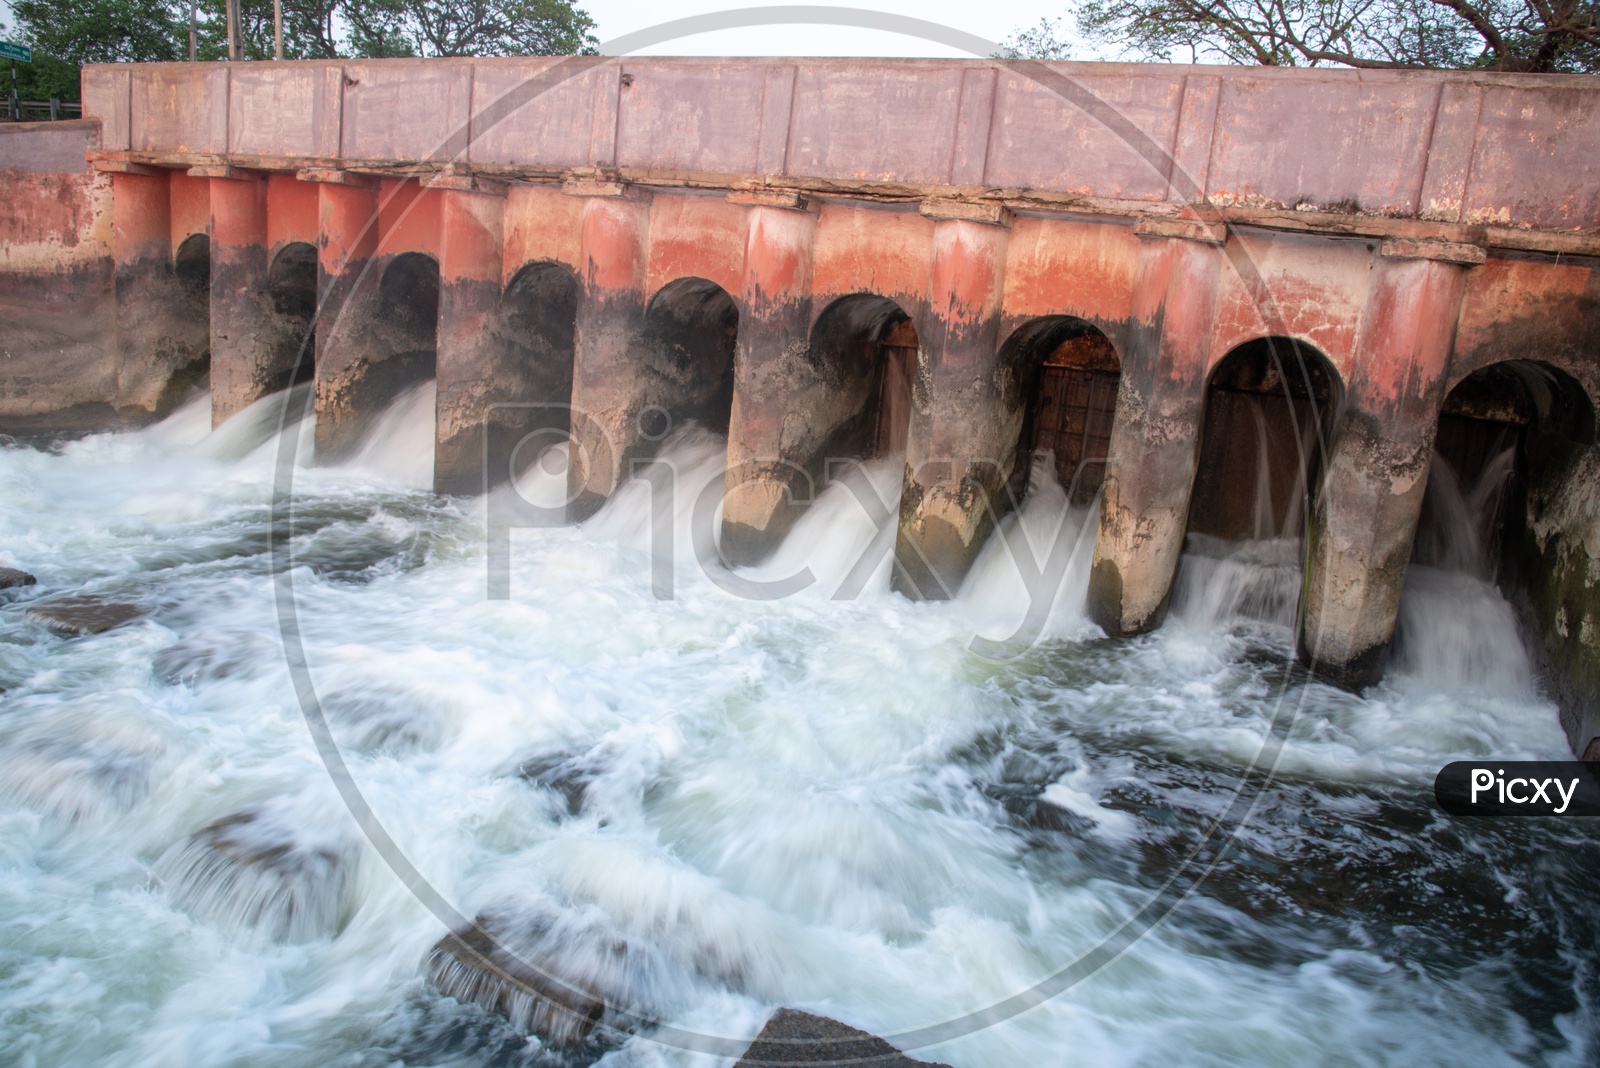 River Krishna Water flowing through the Buckingham Canal/Madras Canal